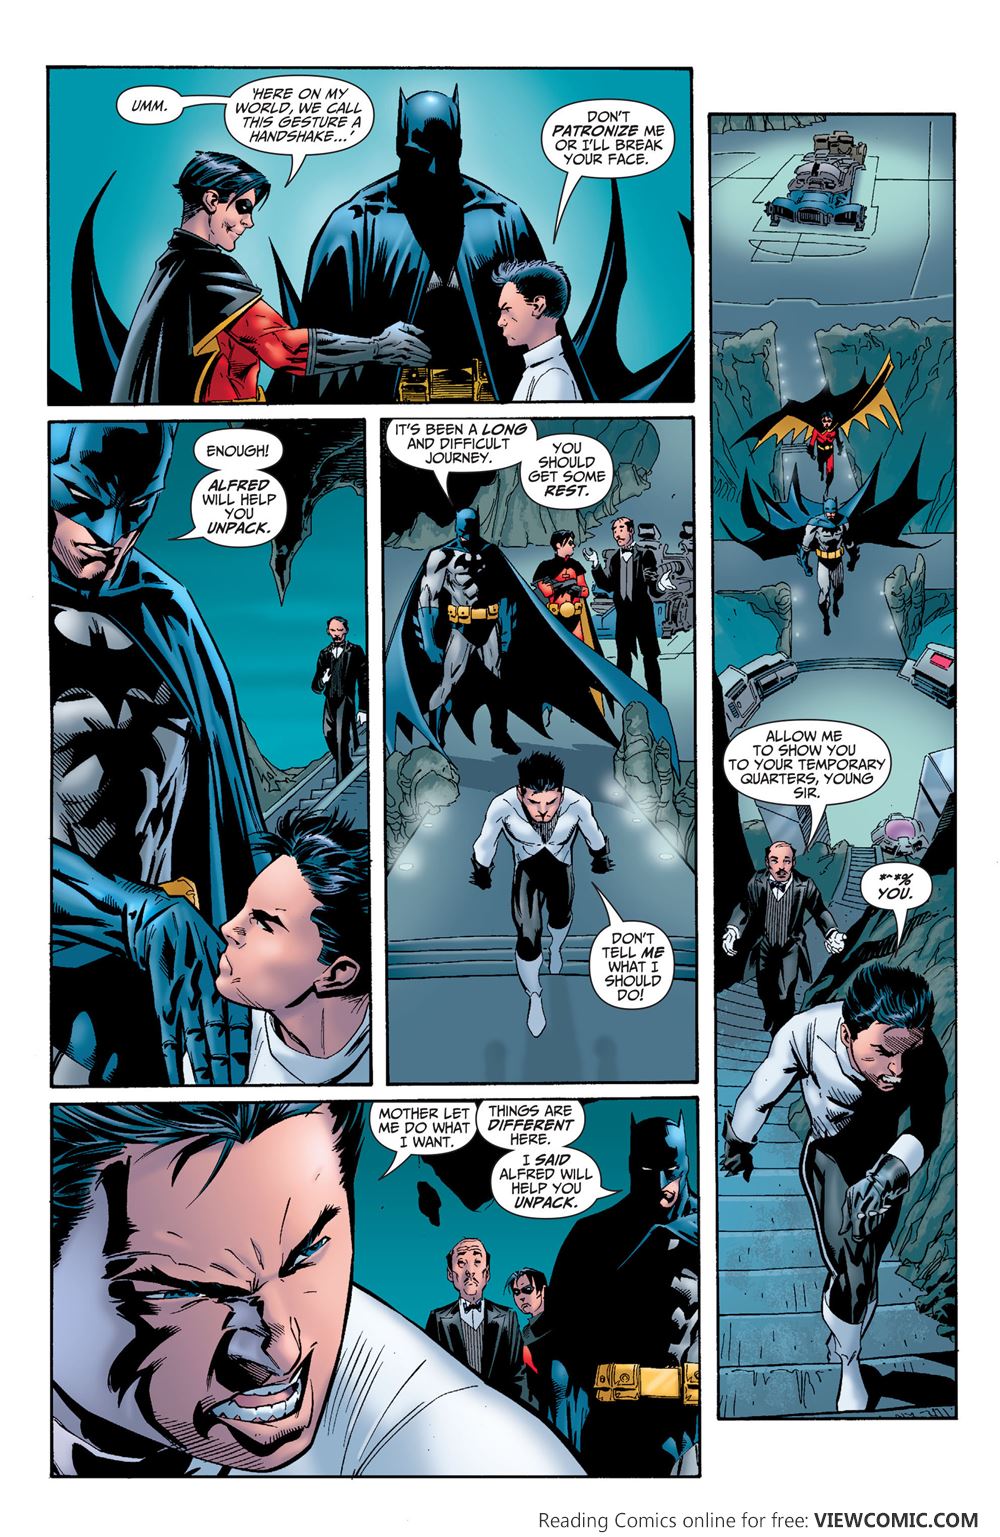 Batman And Son 2014 | Read Batman And Son 2014 comic online in high  quality. Read Full Comic online for free - Read comics online in high  quality .|